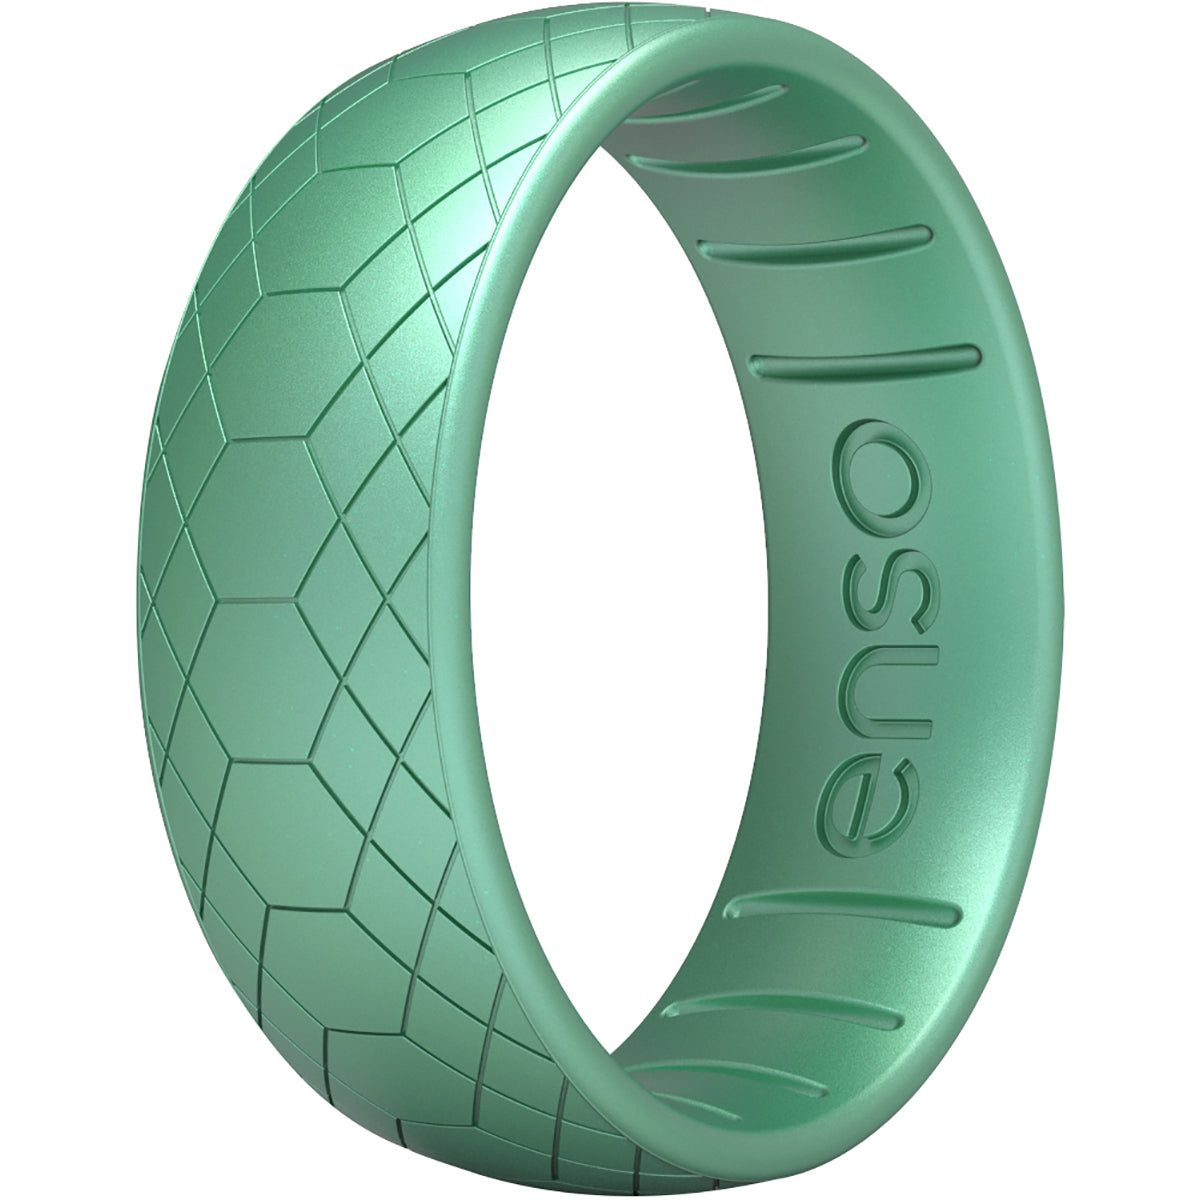 Enso Rings Classic Etched Legends Series Silicone Ring - 7 - Medusa Snake Enso Rings